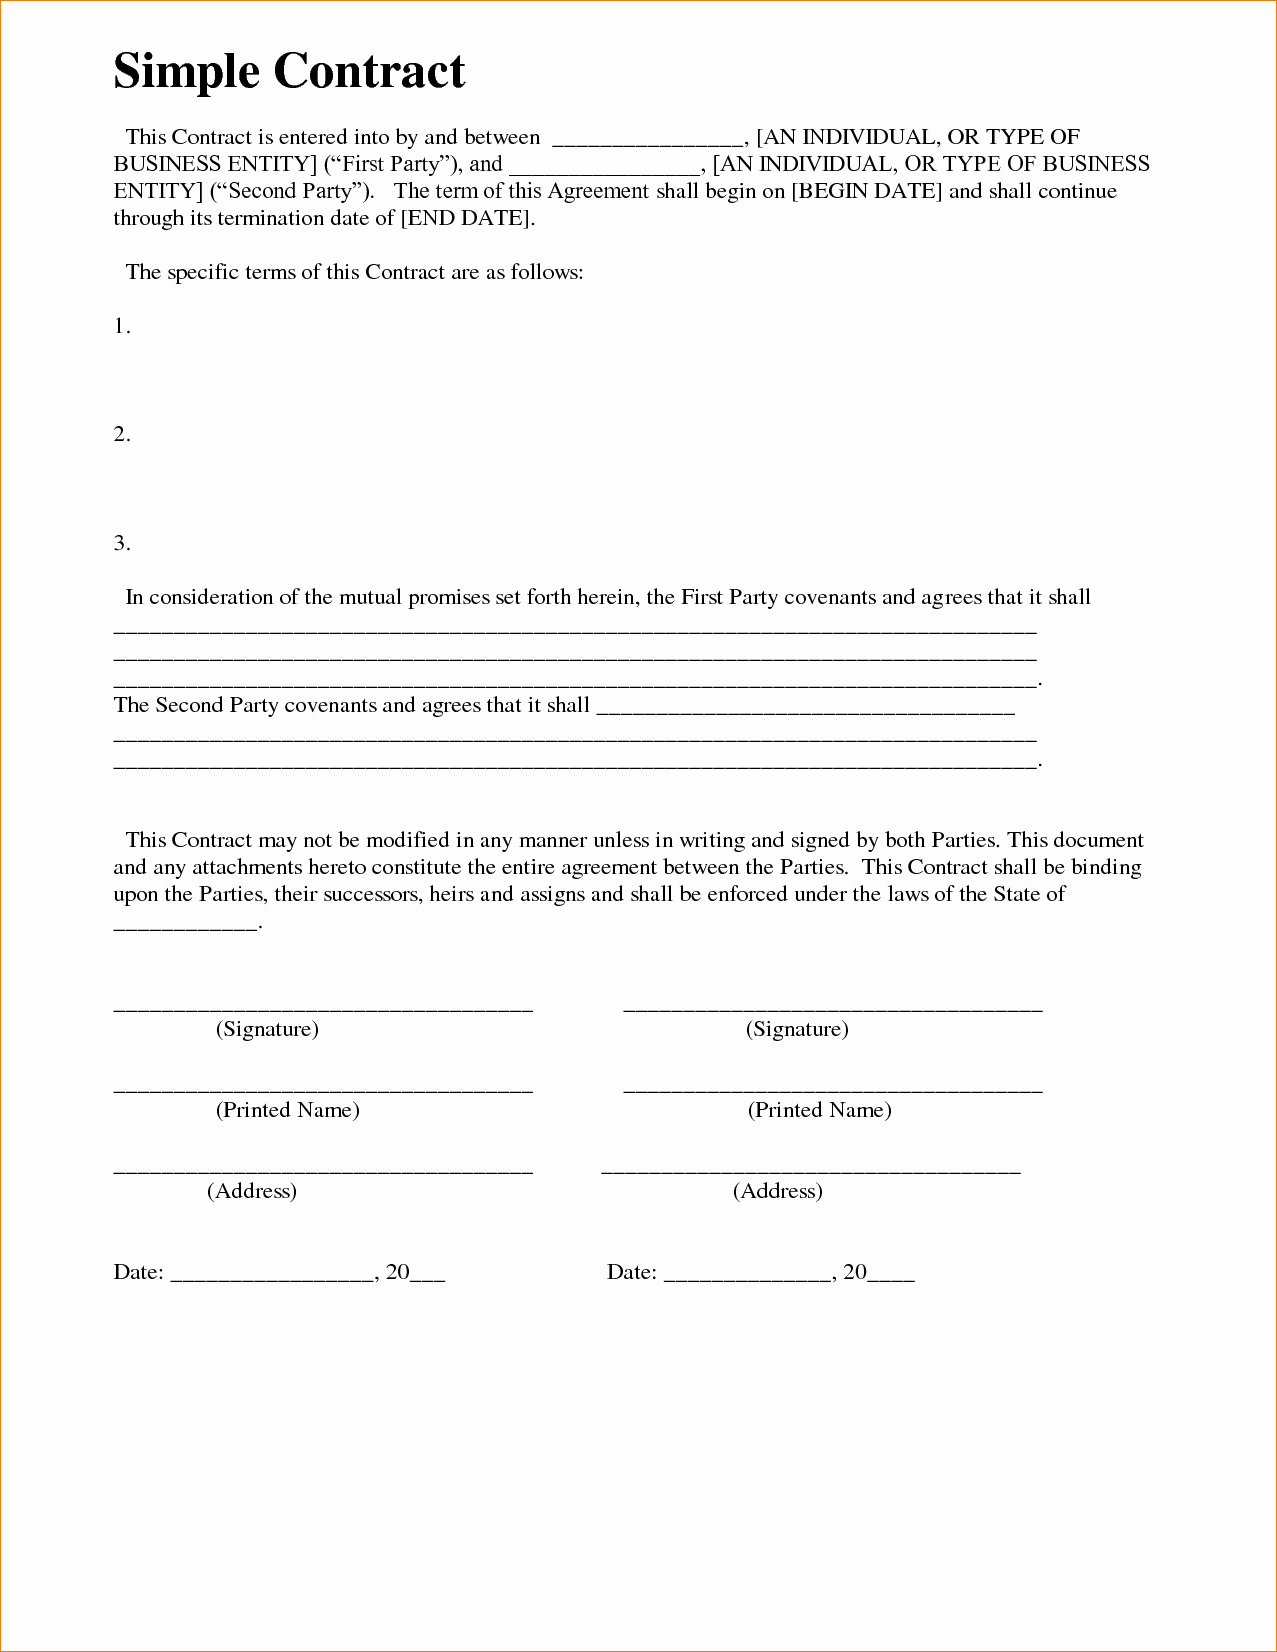 Simple Construction Contract Template Free Luxury Simple Contract Agreement